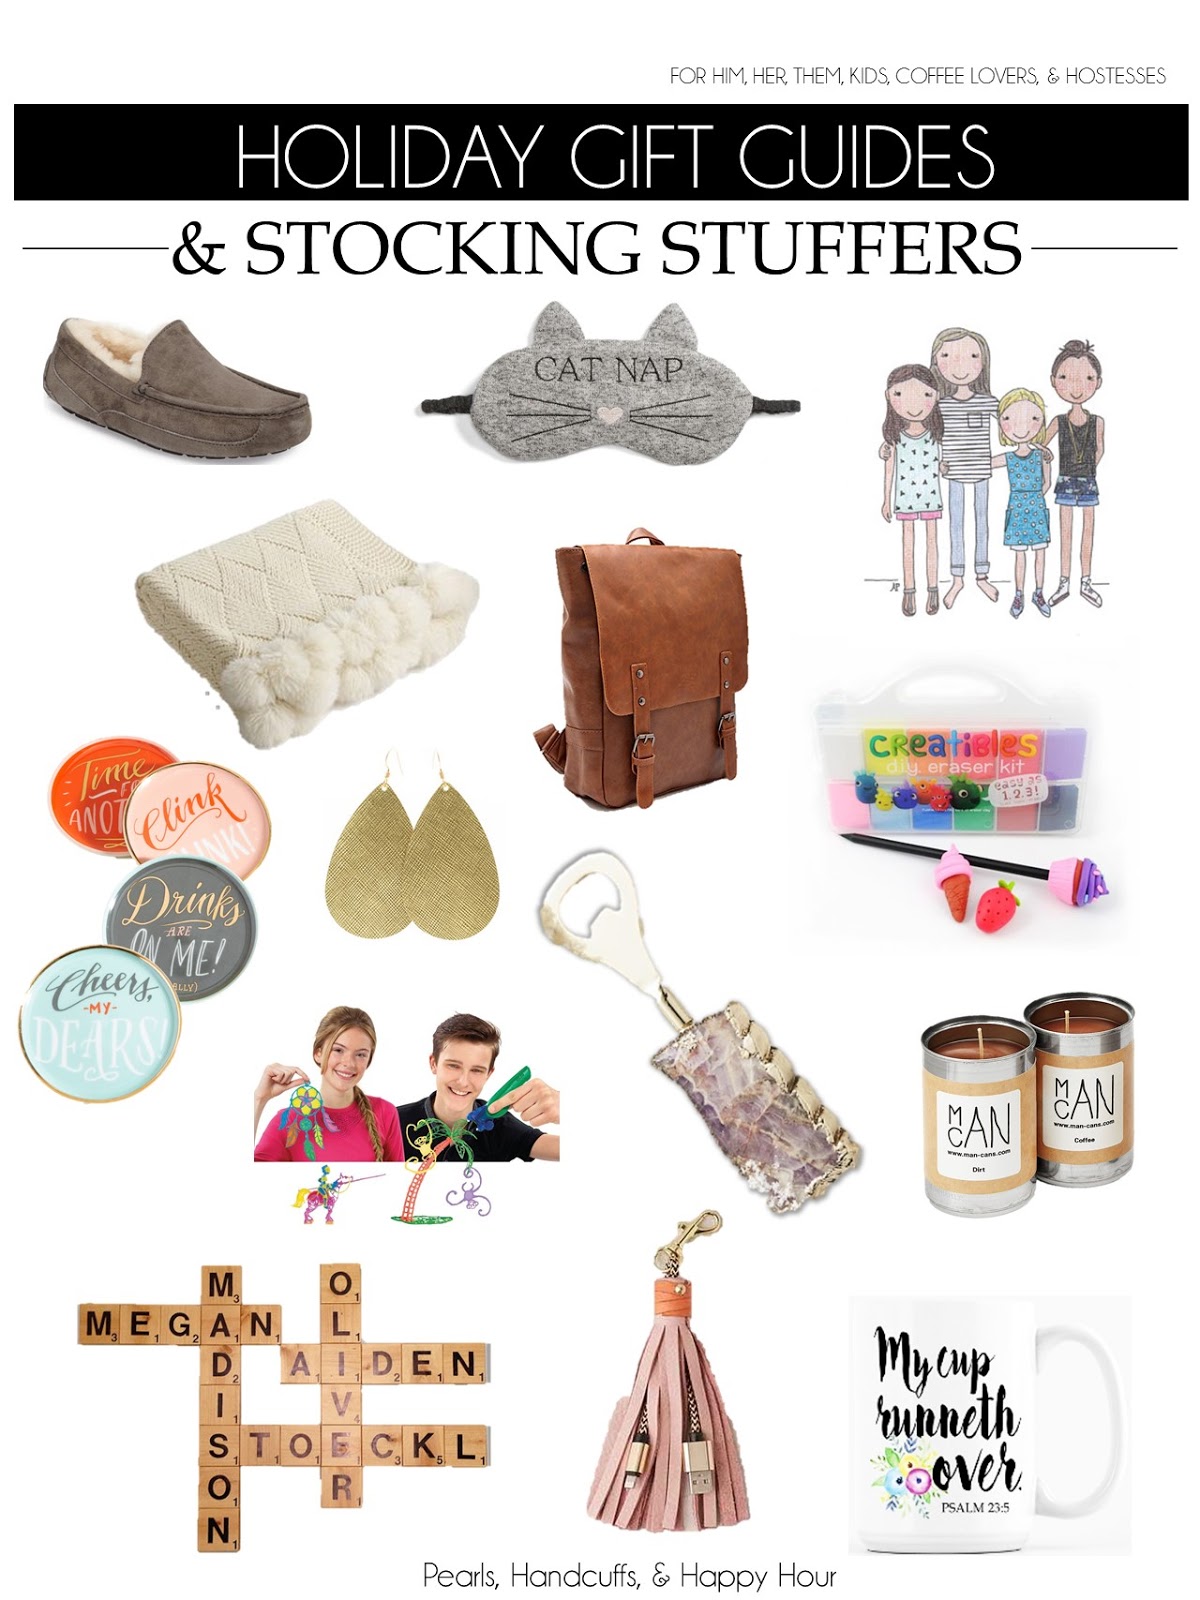 101 Stocking Stuffer Ideas For a Wife or Mom